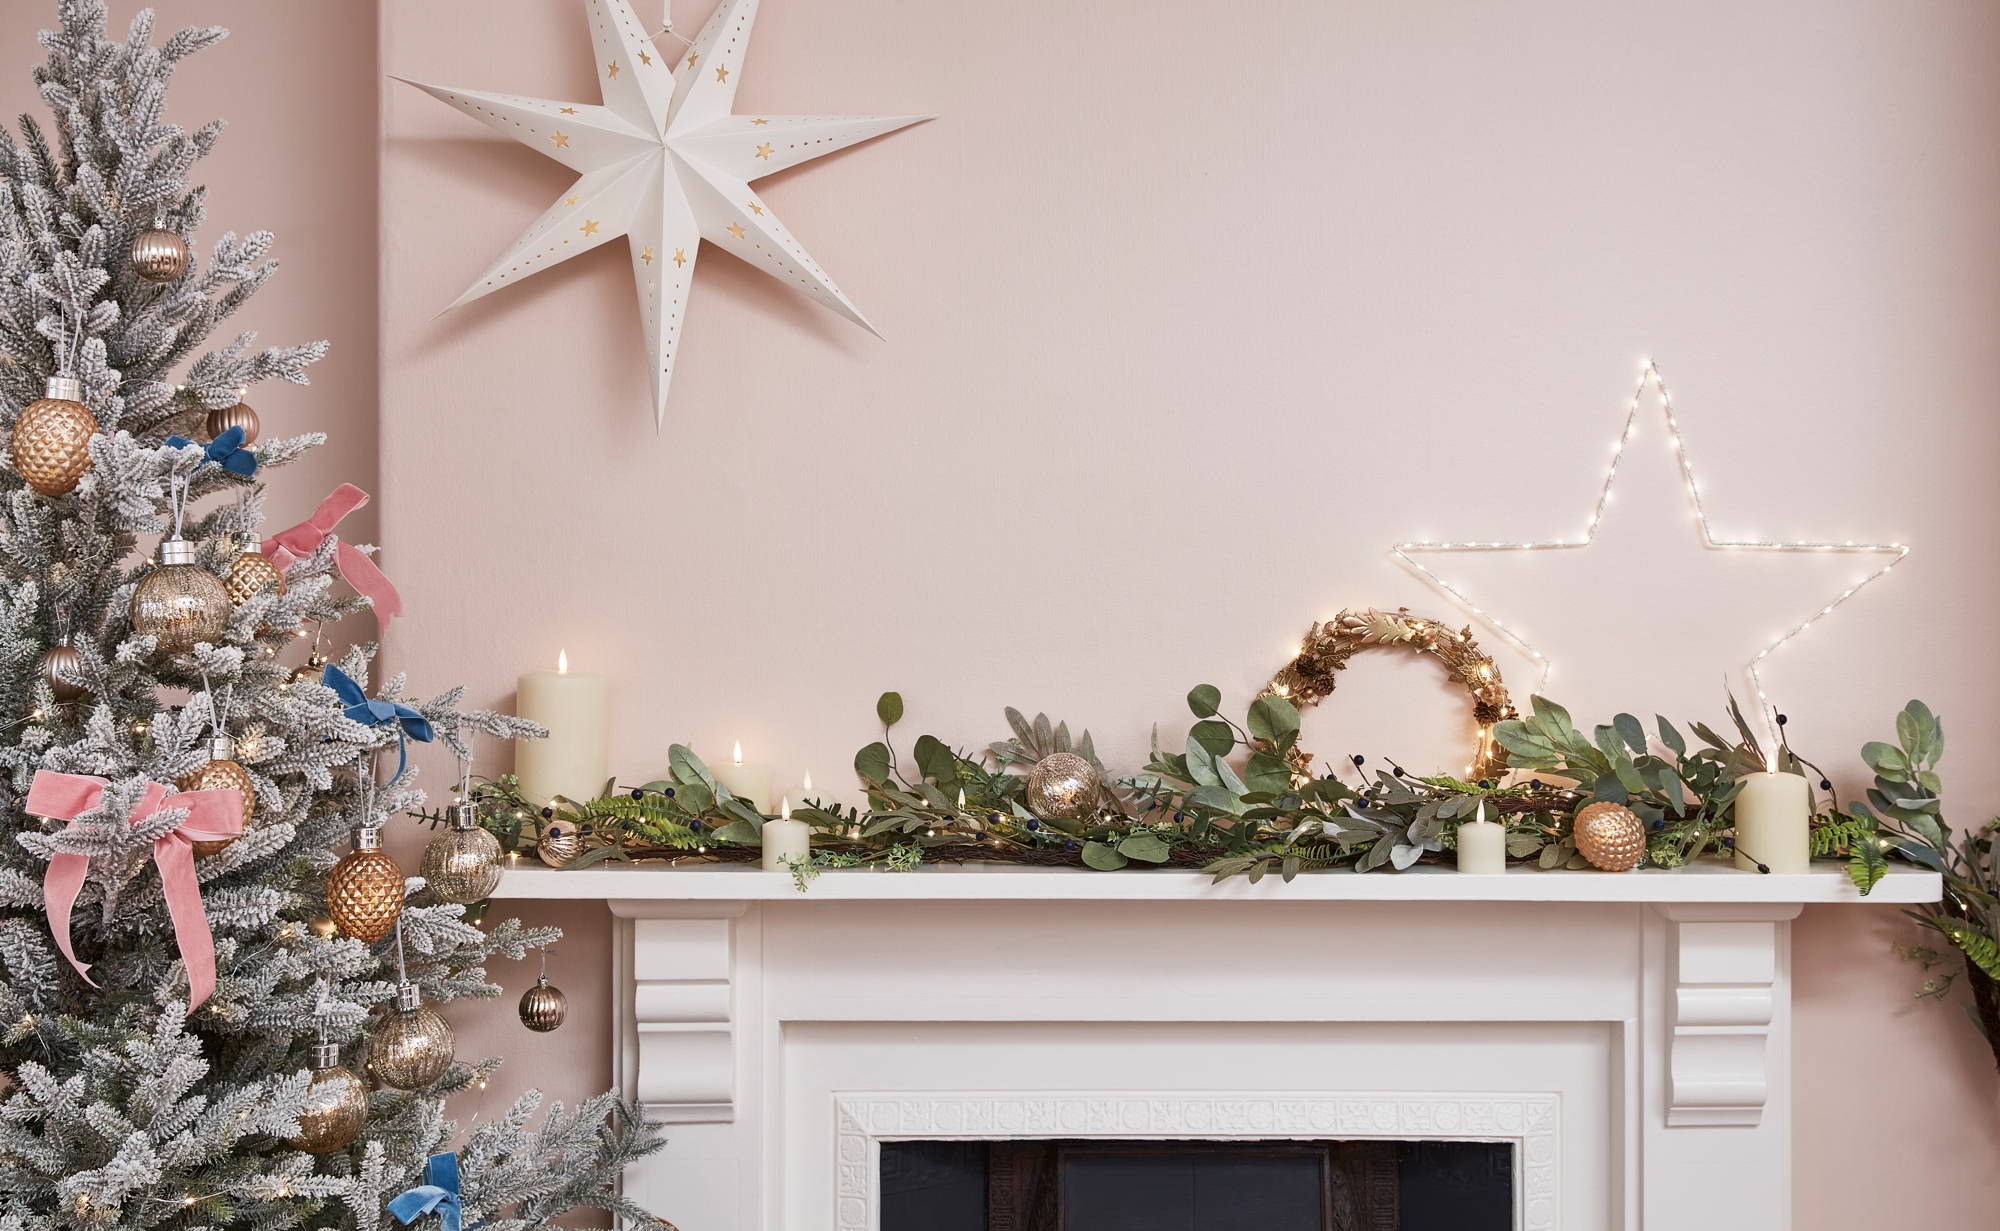 Pastel Christmas setting with a garland, star lights and snowy Christmas tree.